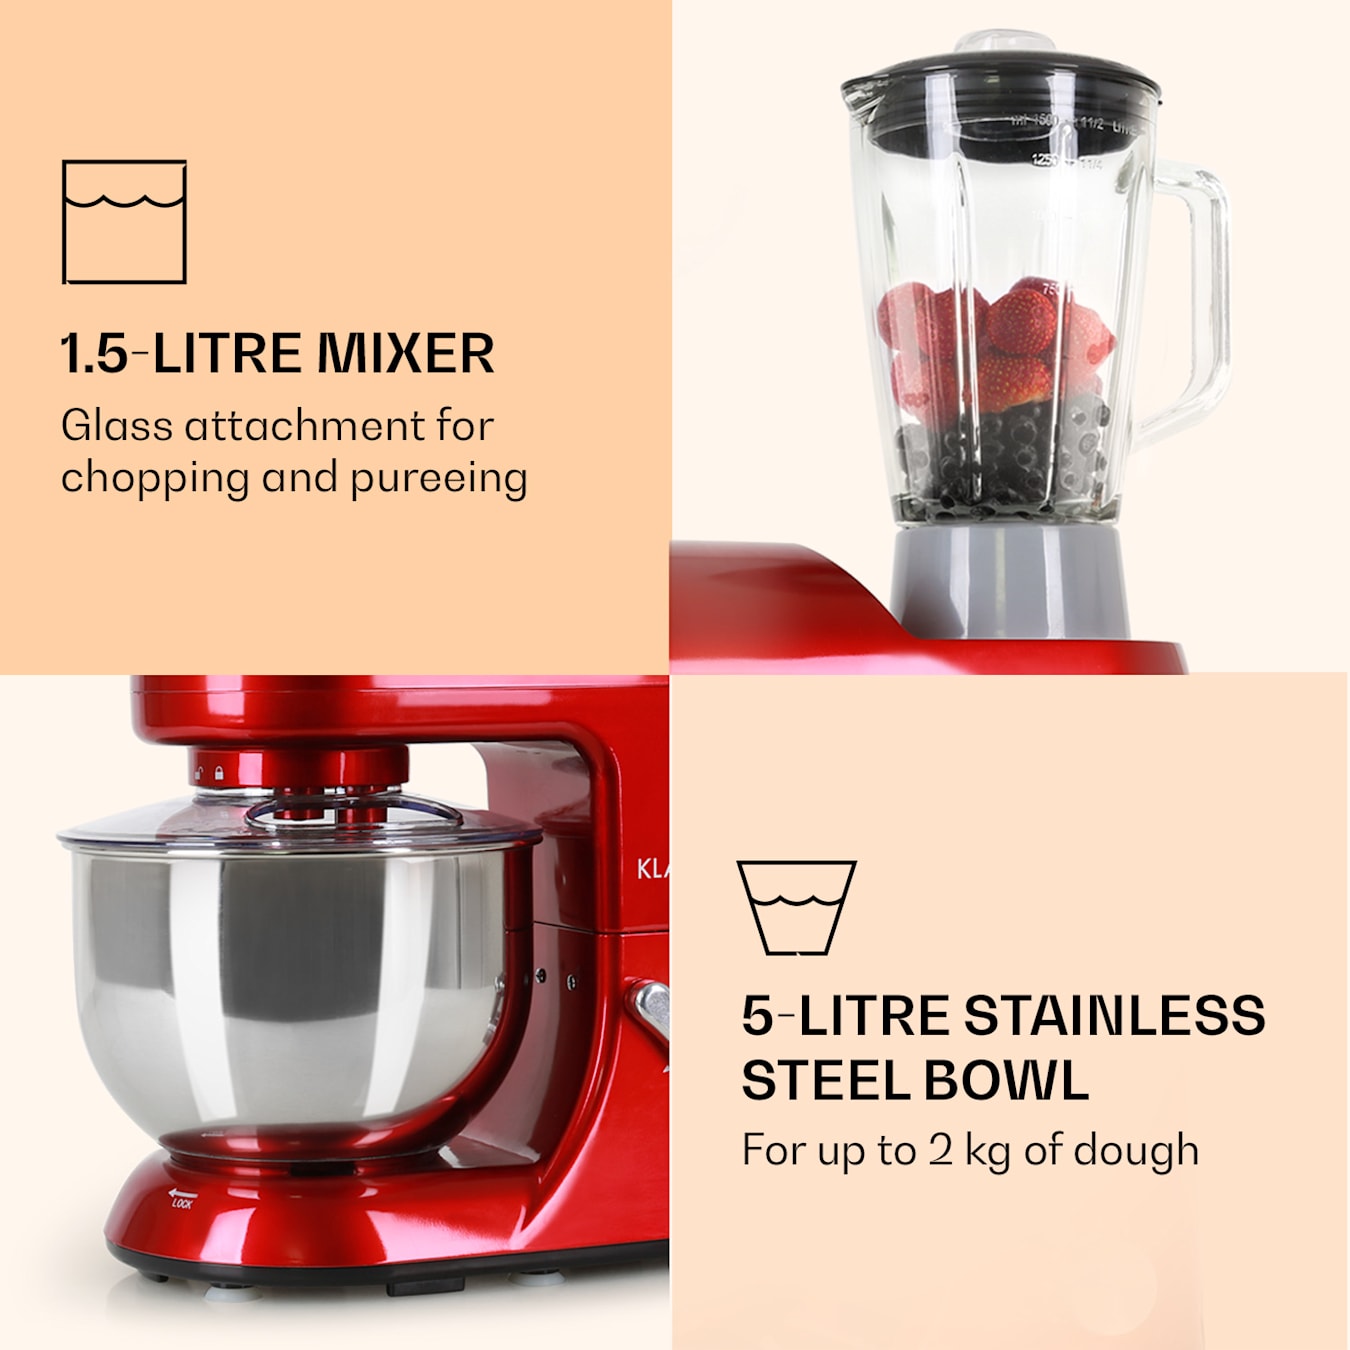 G-TING Metal Food Grinder Attachment for KitchenAid Stand Mixers, Meat  Grinder Attachment Included 2 Sausage Stuffer Tubes, 3 Grindin